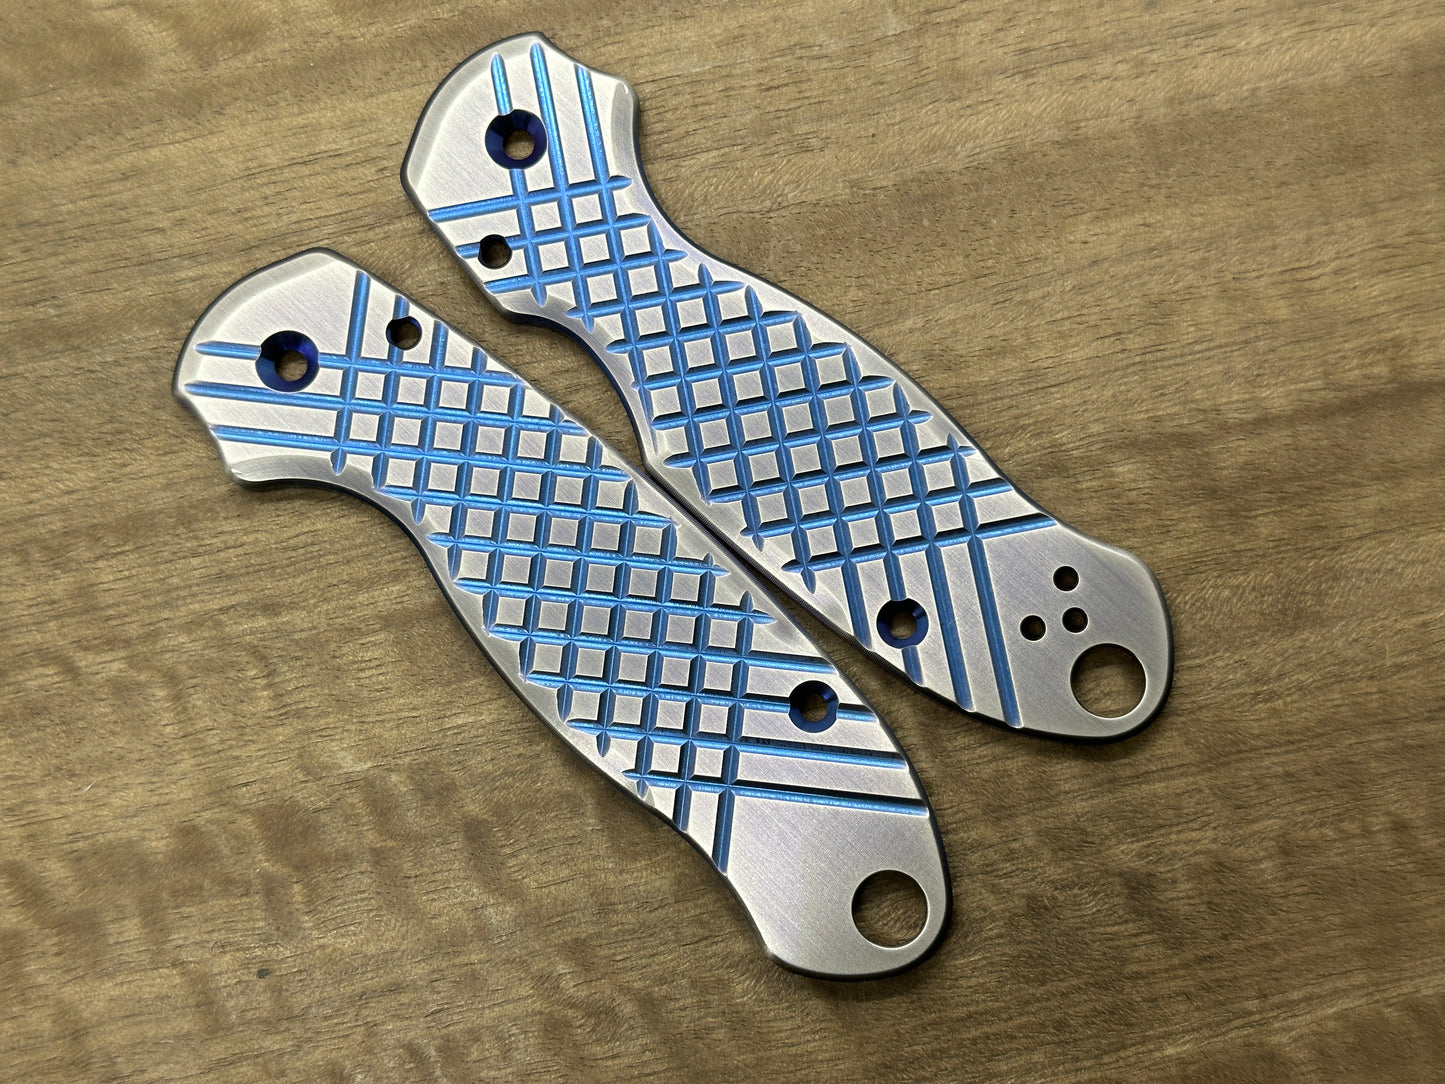 2-Tone BLUE ano & Brushed FRAG cnc milled Titanium scales for Spyderco Para 3